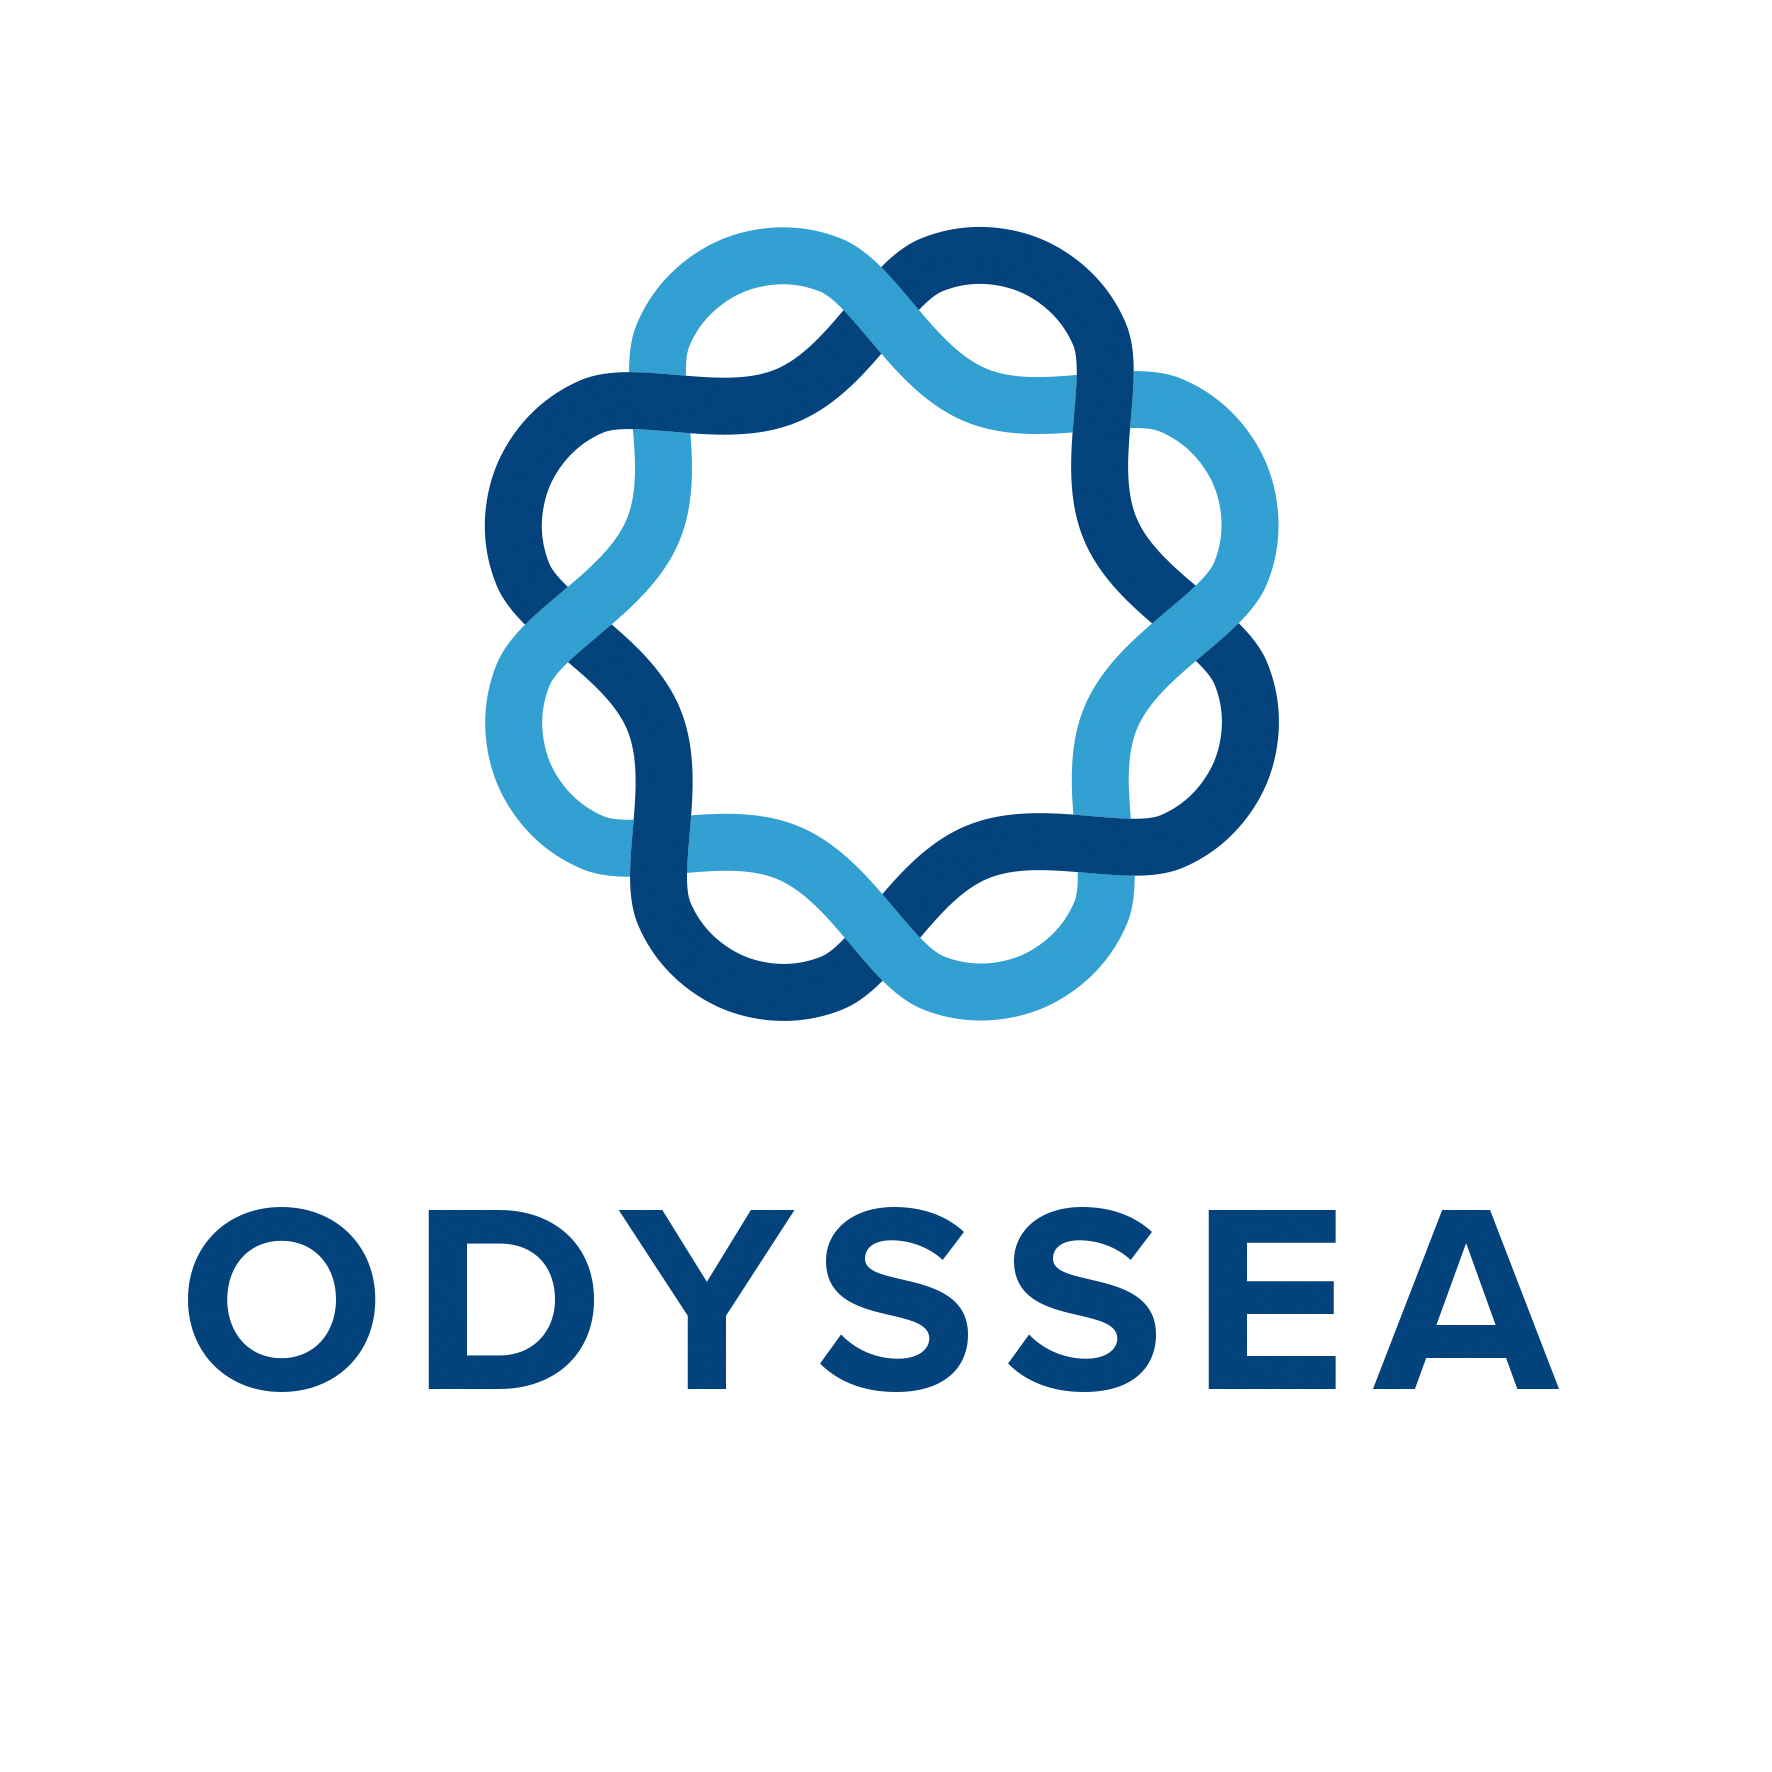 ODYSSEA - OPERATING A NETWORK OF INTEGRATED OBSERVATORY SYSTEMS IN THE MEDITERRANEAN SEA